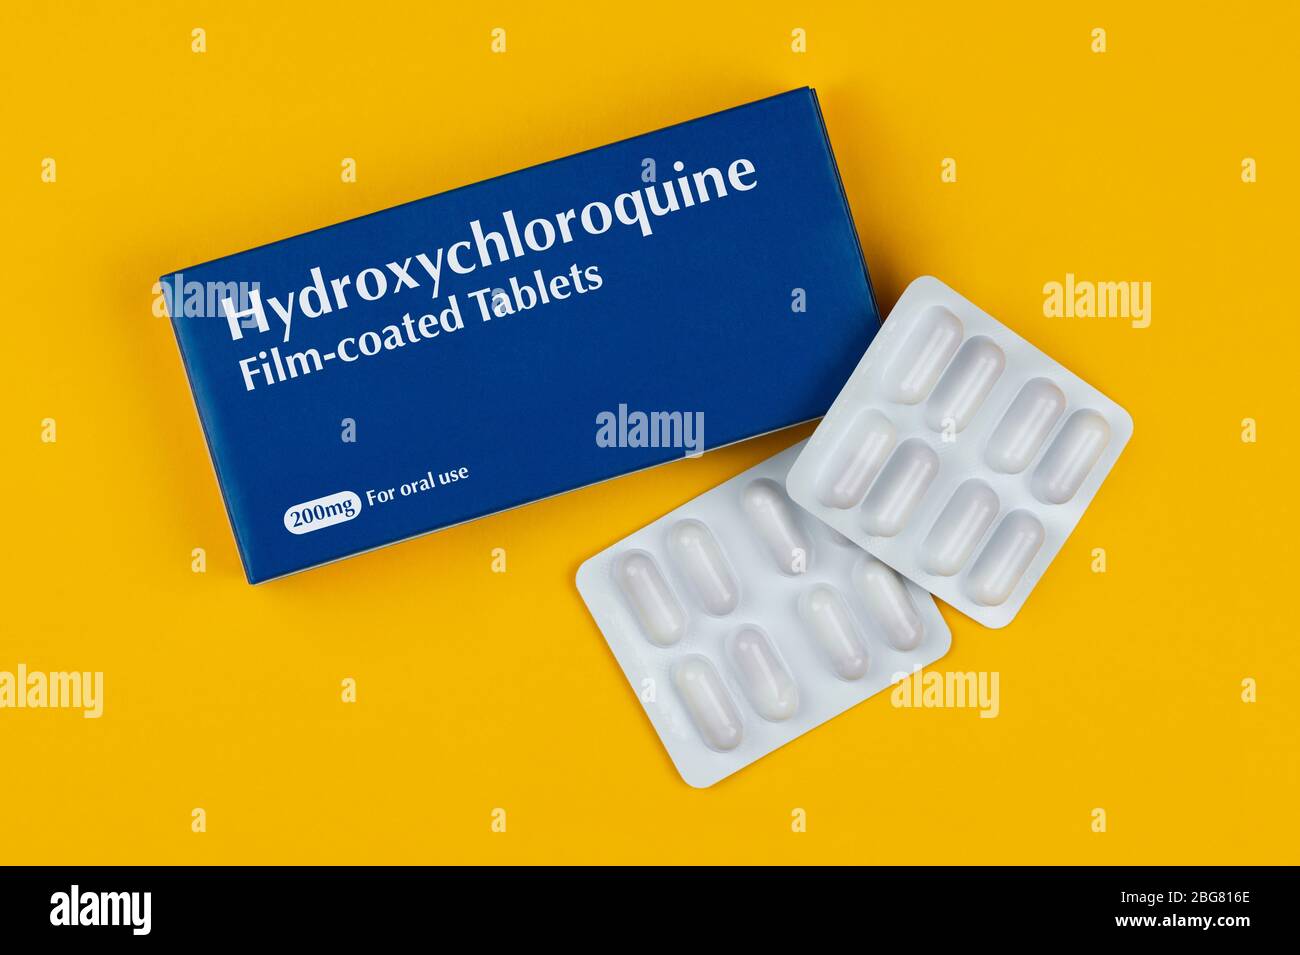 A box of tablets labelled Hydroxychloroquine shot against a yellow background. Stock Photo